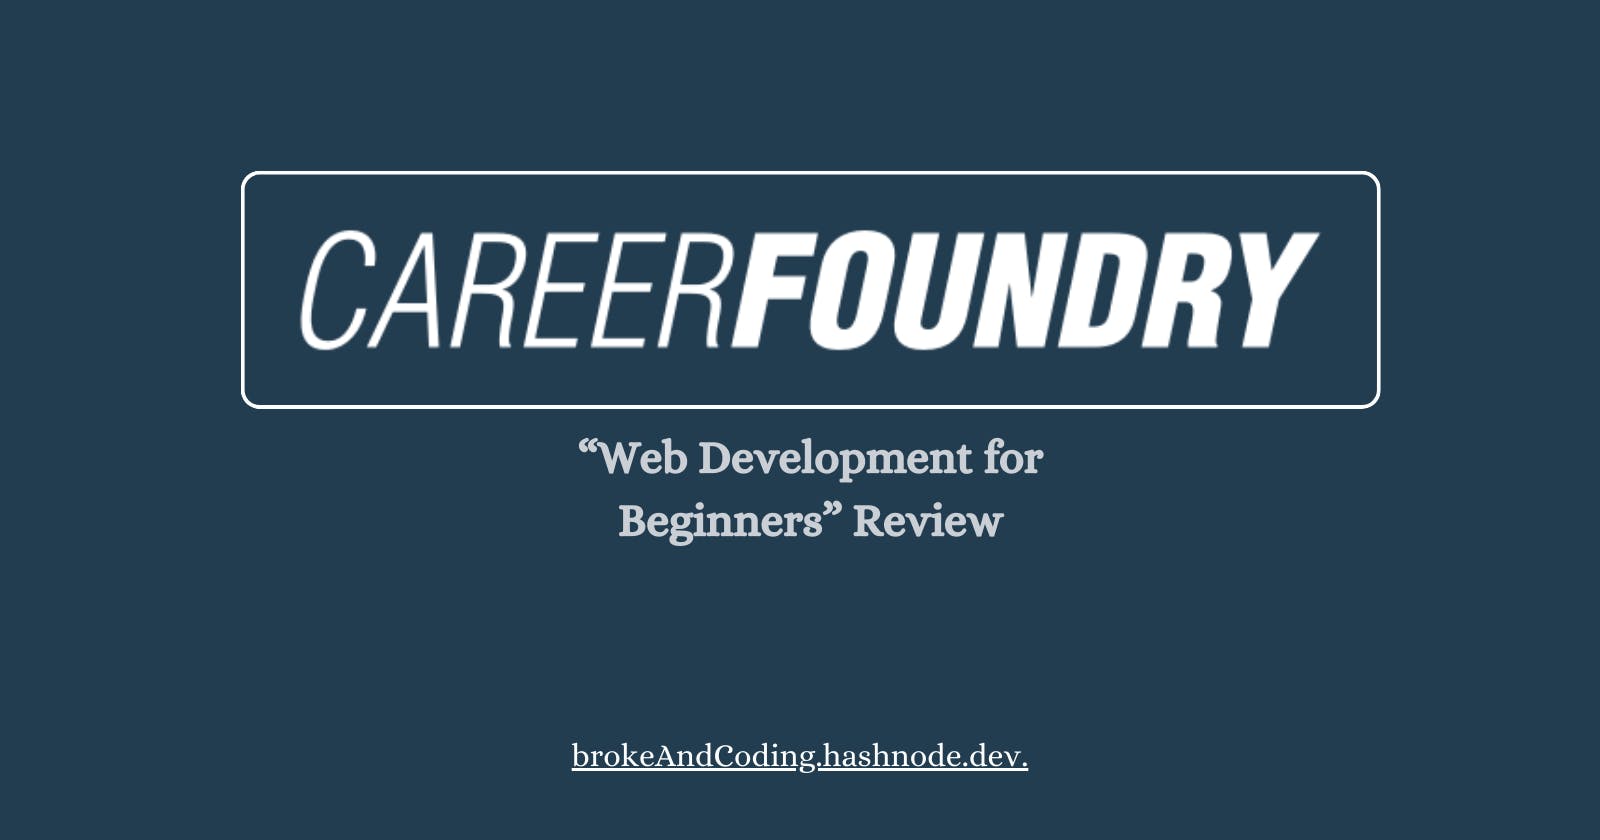 CareerFoundry - Review